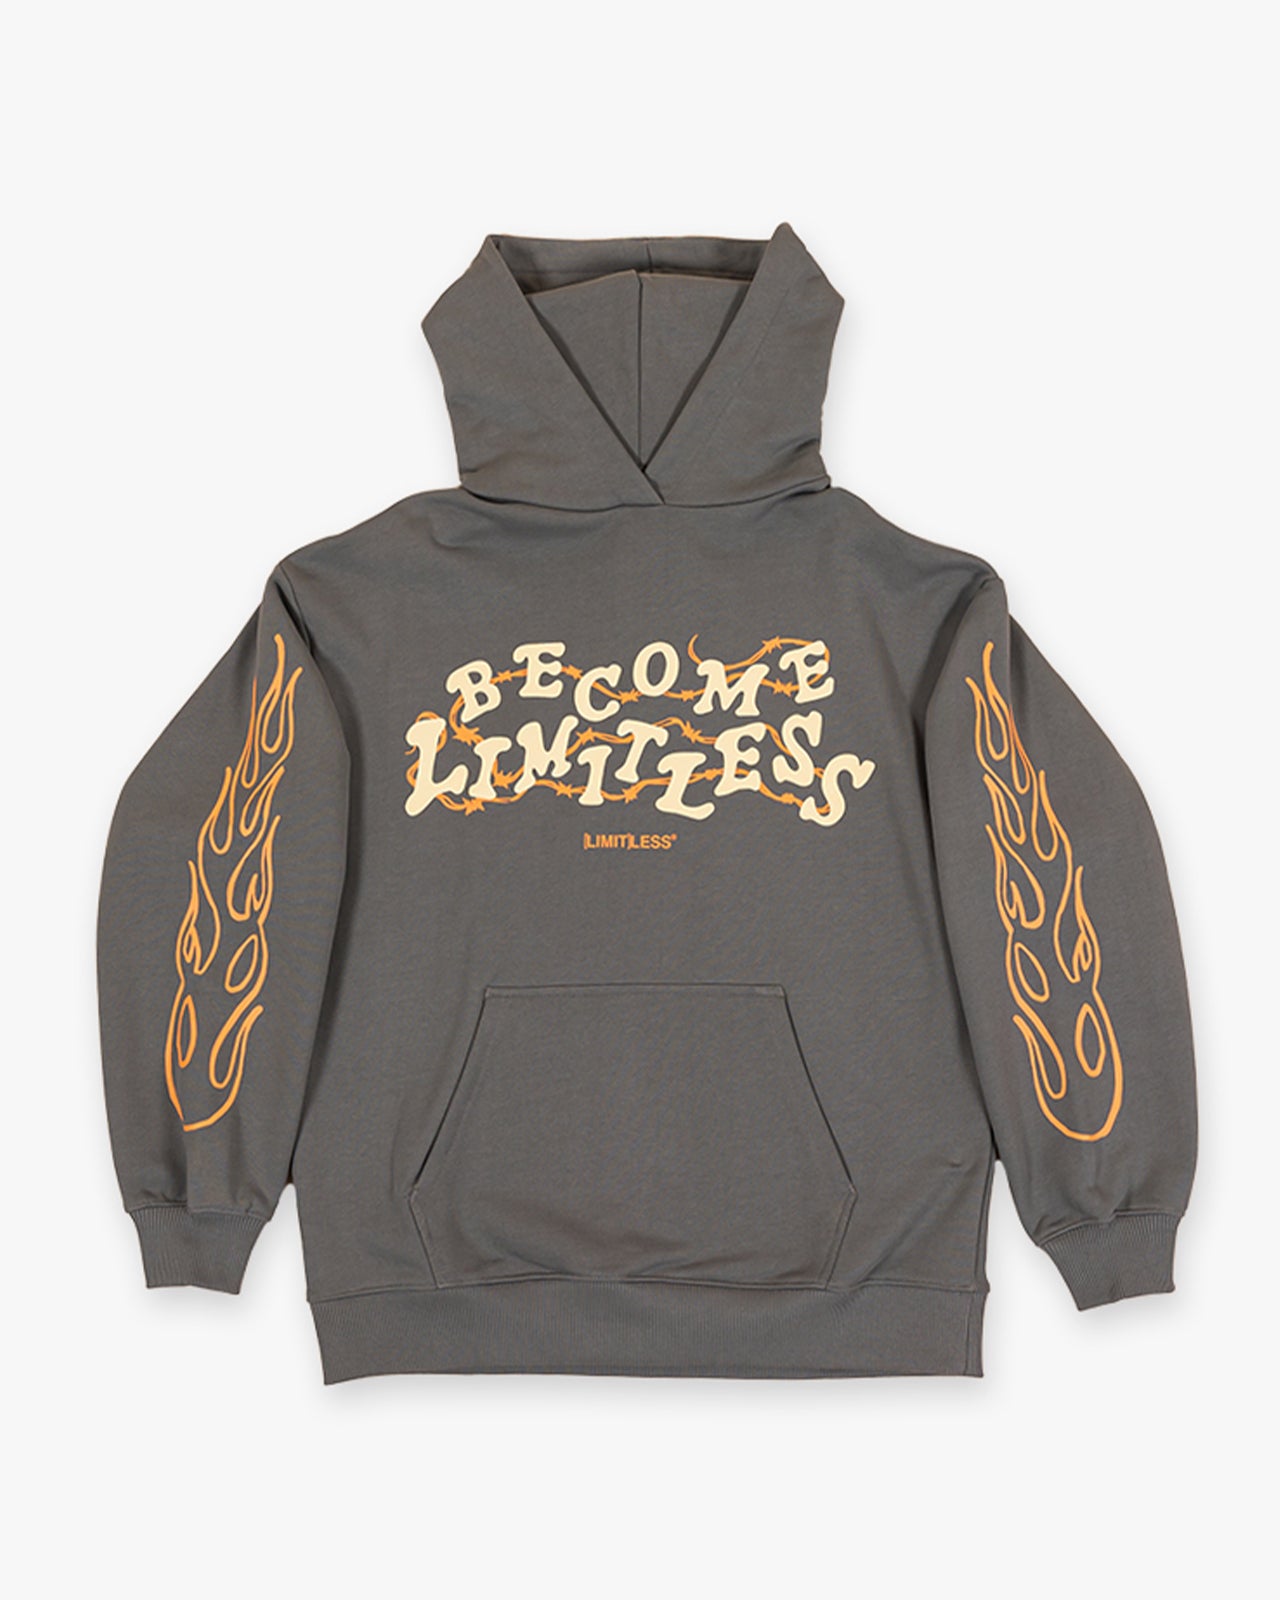 BECOME LIMITLESS HOODIE